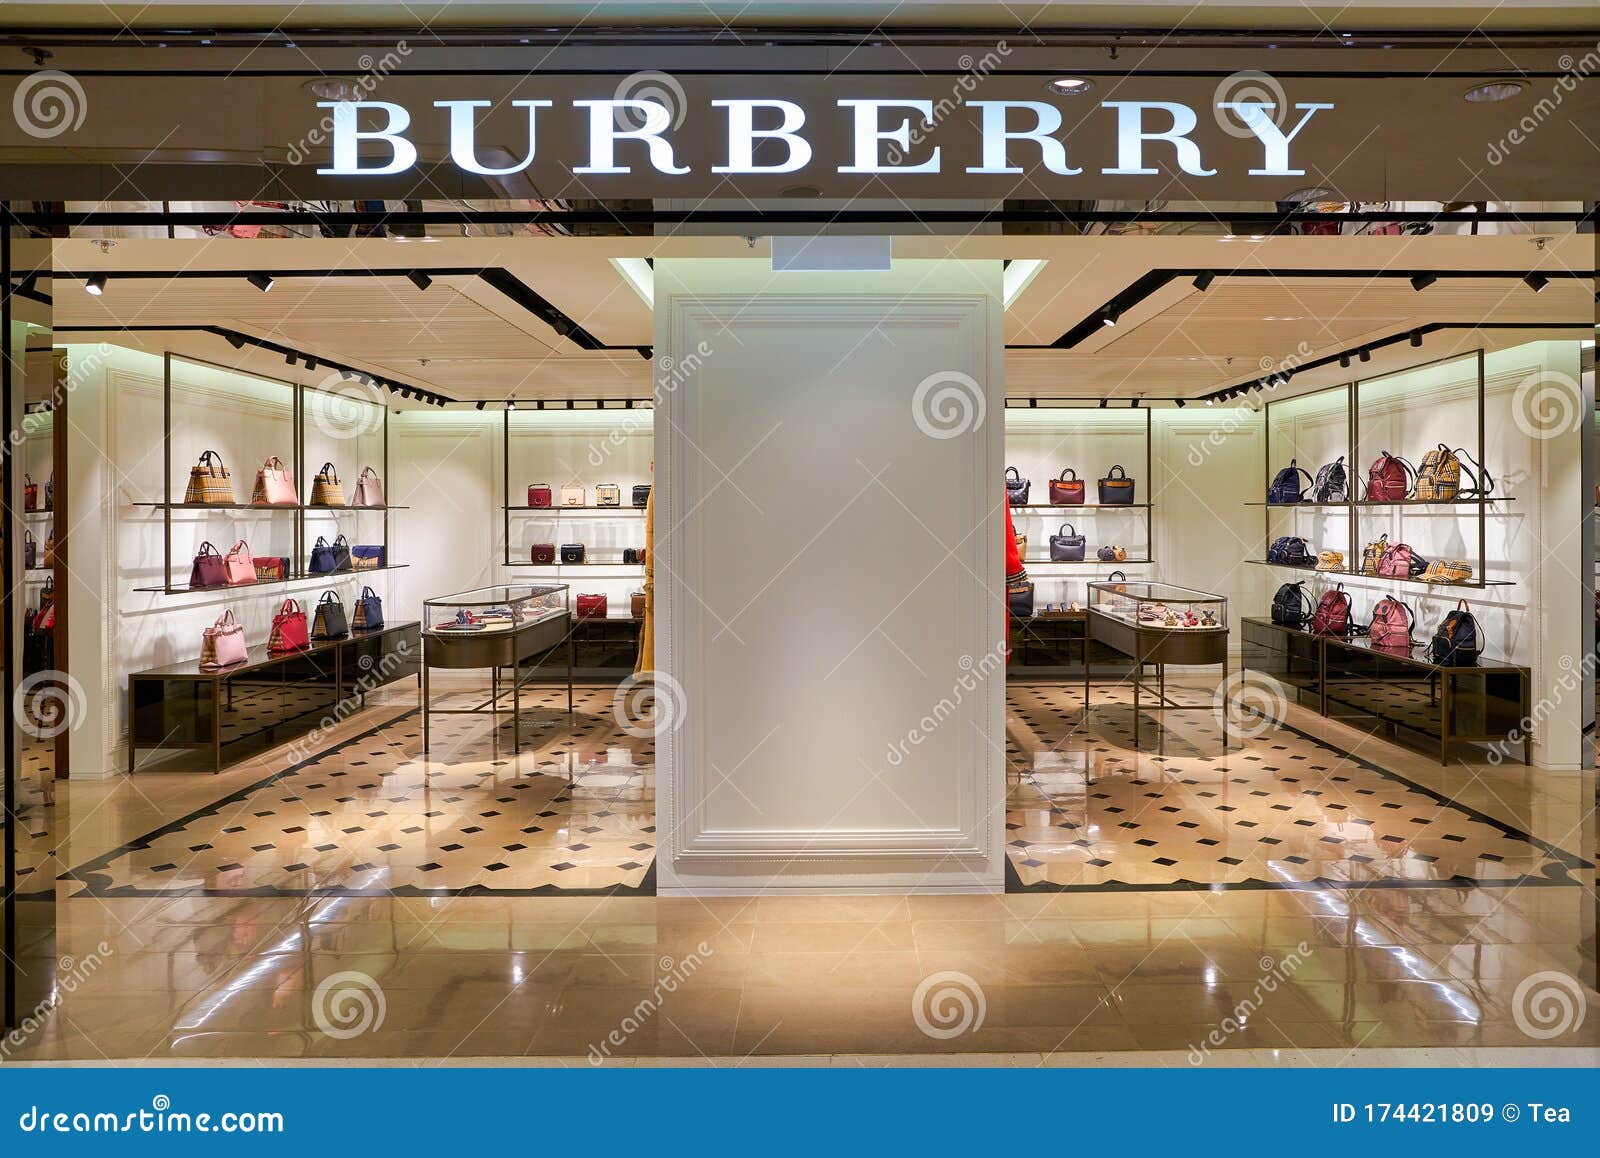 istanbul burberry outlet